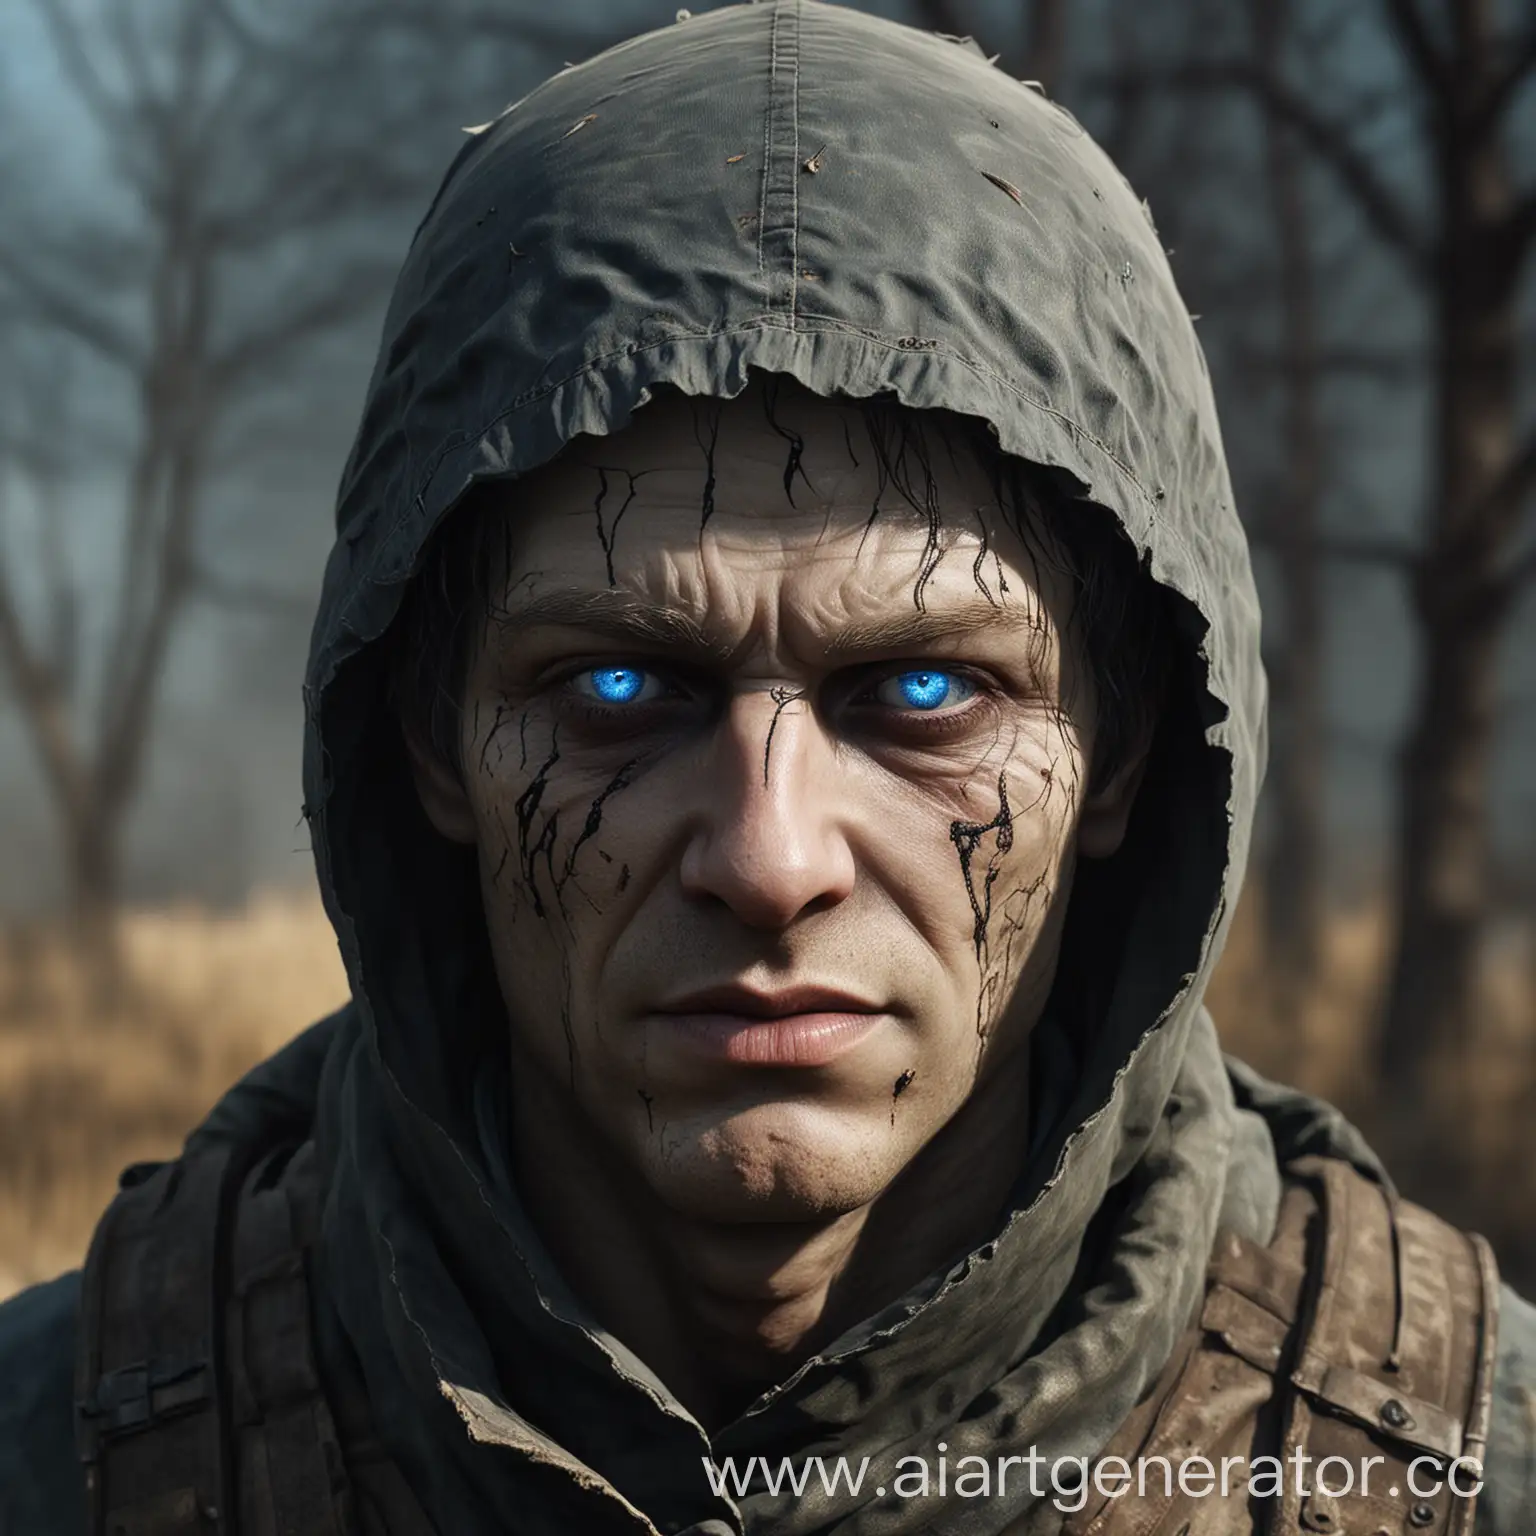 stalker from the game, with white skin and blue eyes